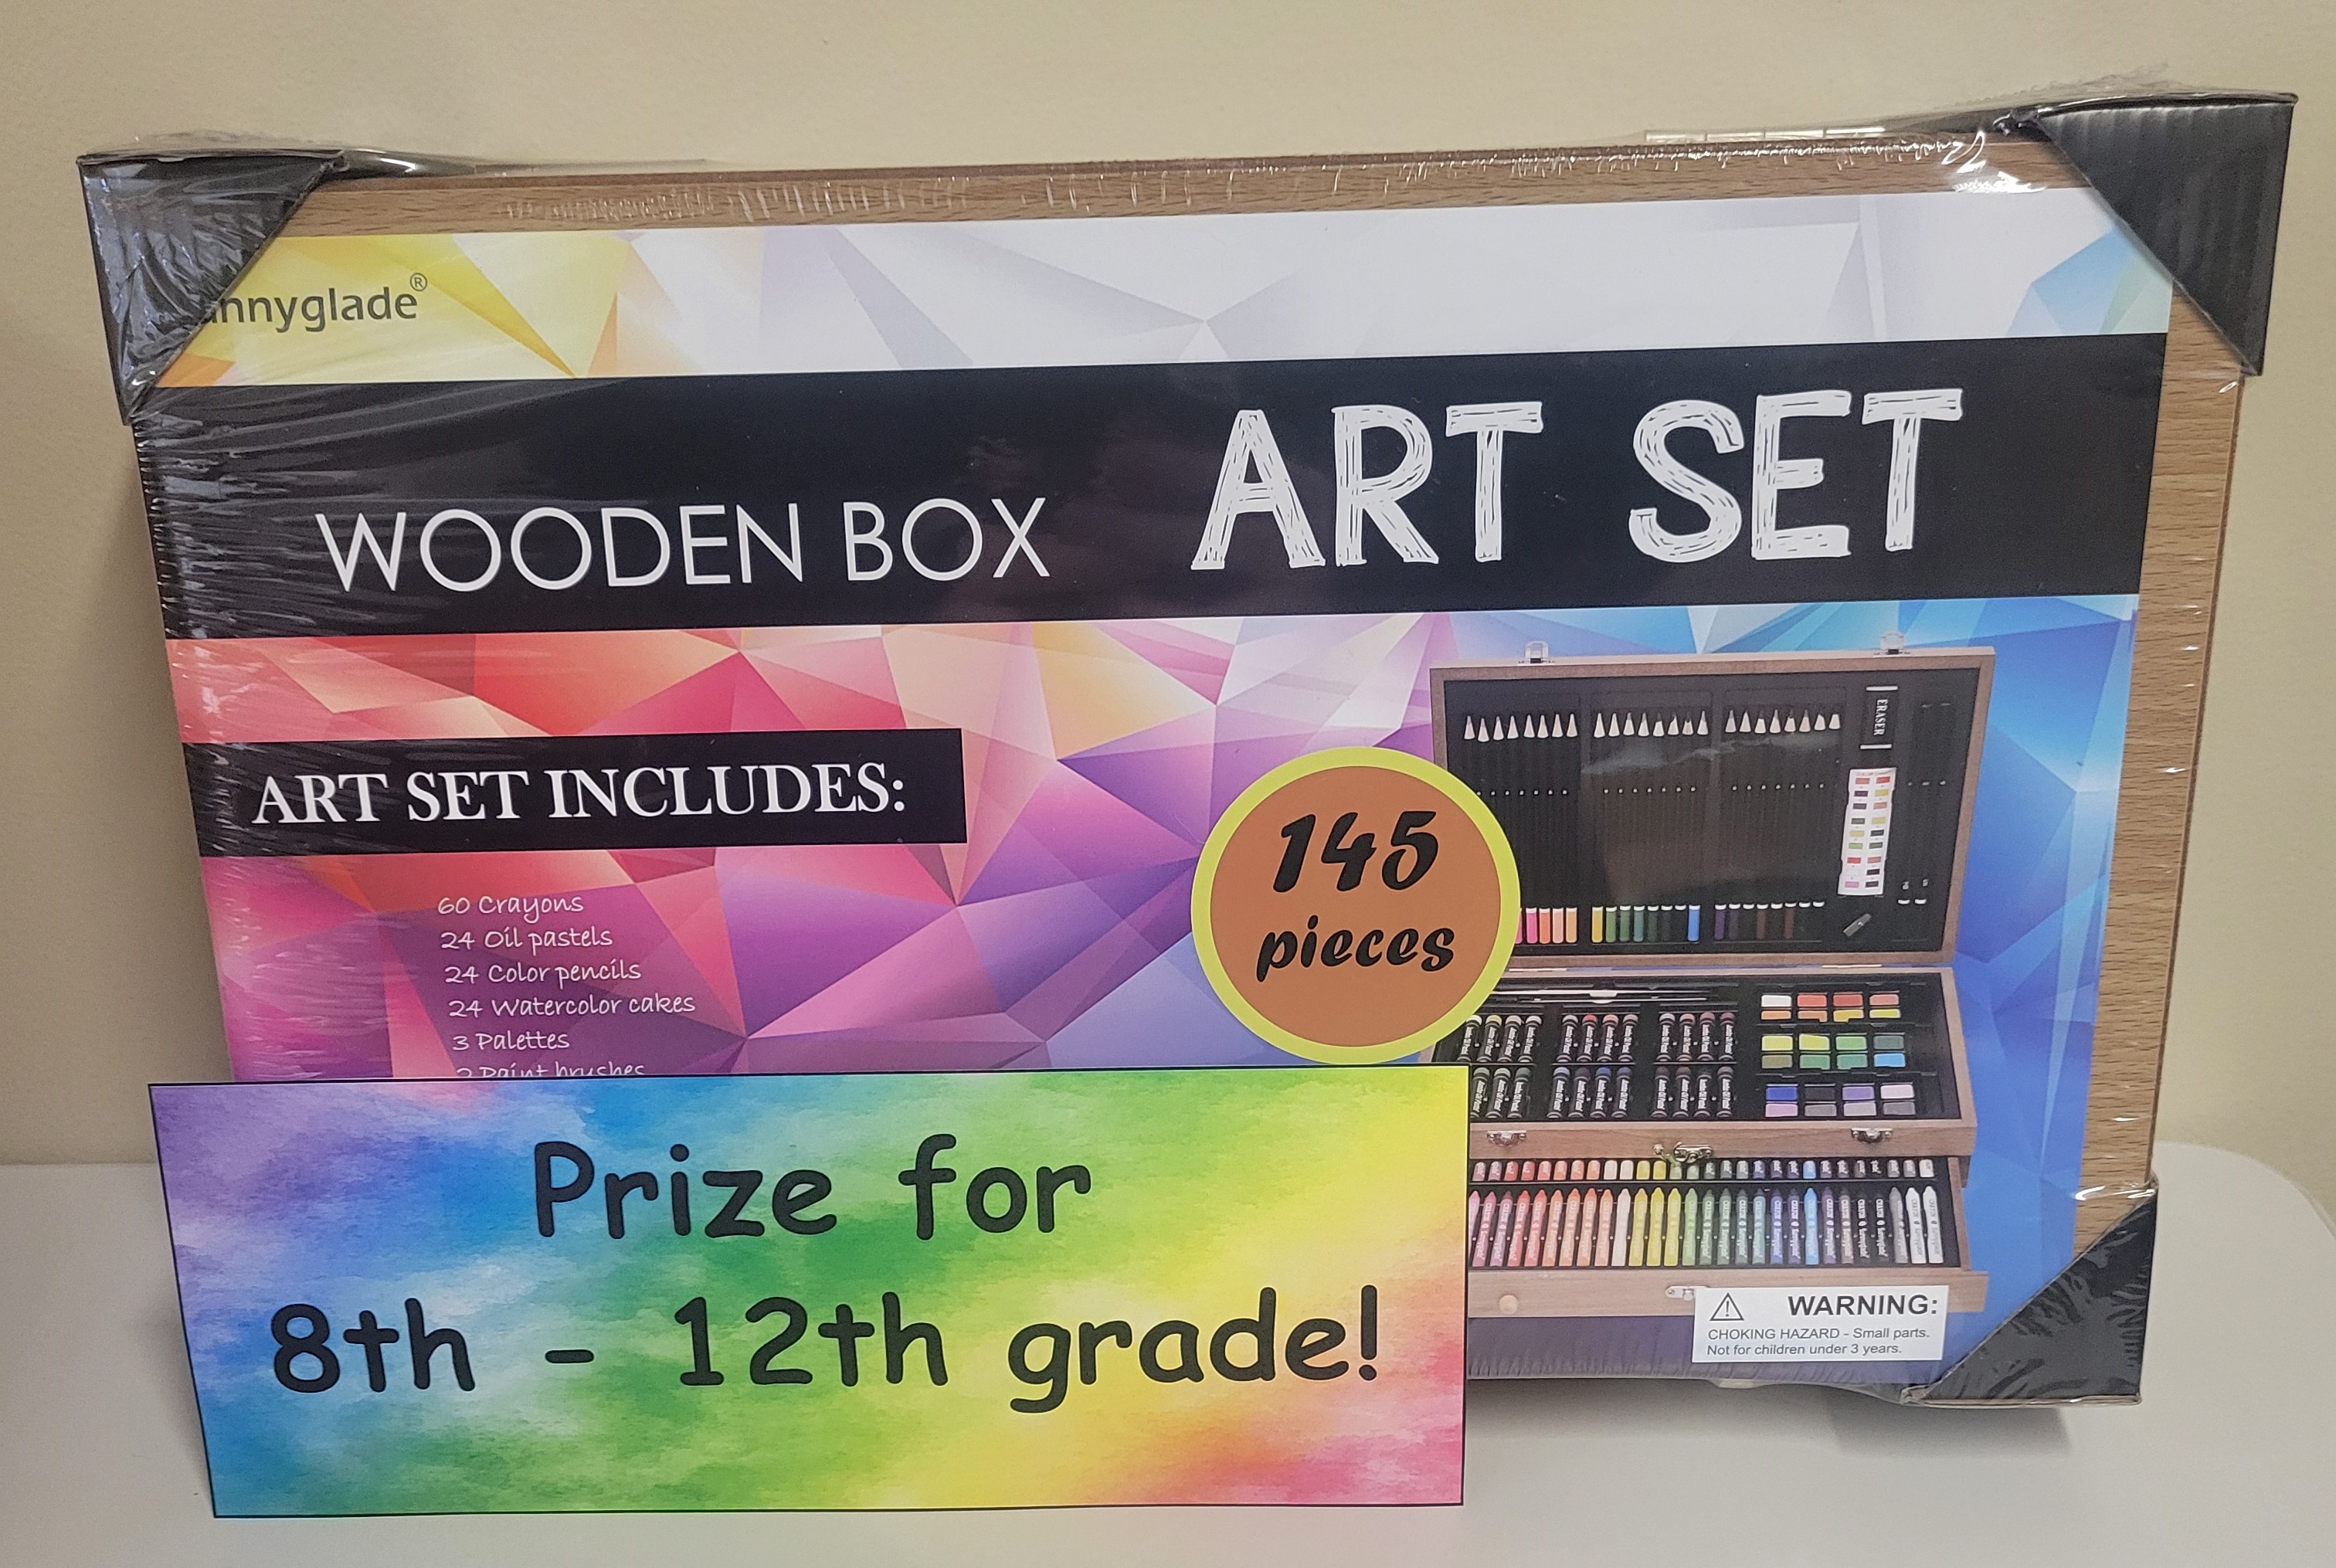 Wooden Art Set Prize for 8th - 12th grade